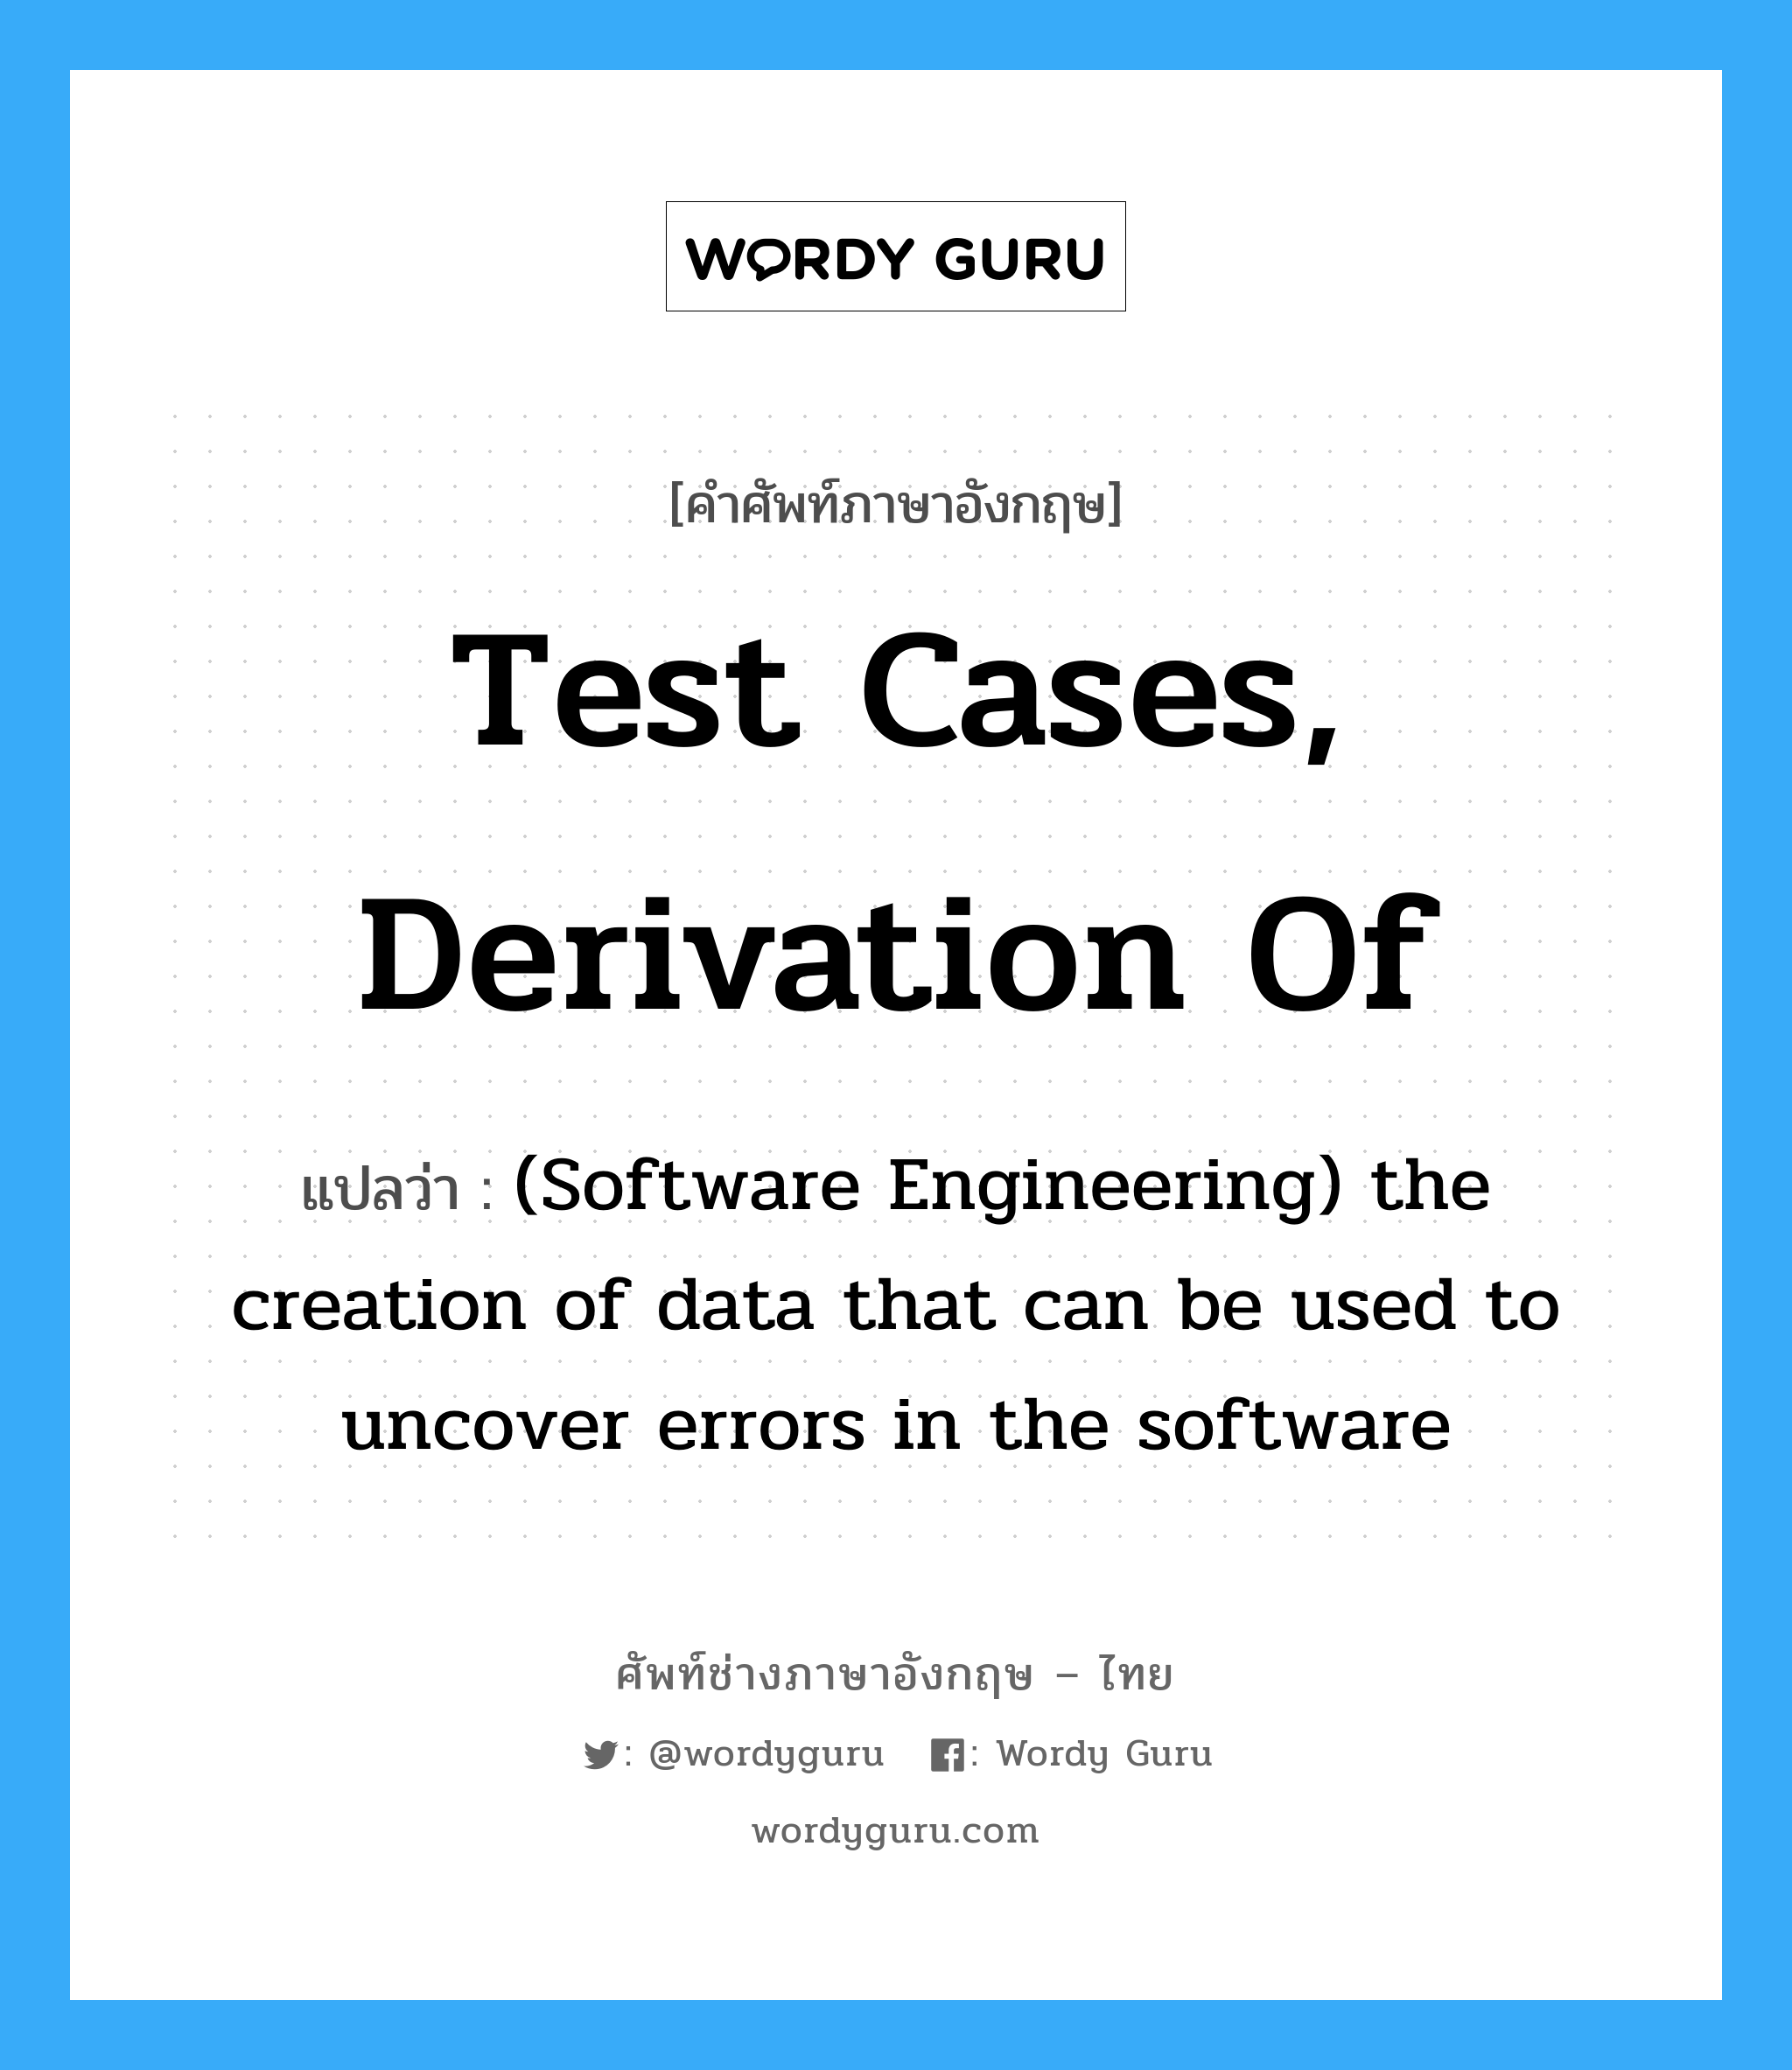 Test cases, derivation of แปลว่า?, คำศัพท์ช่างภาษาอังกฤษ - ไทย Test cases, derivation of คำศัพท์ภาษาอังกฤษ Test cases, derivation of แปลว่า (Software Engineering) the creation of data that can be used to uncover errors in the software